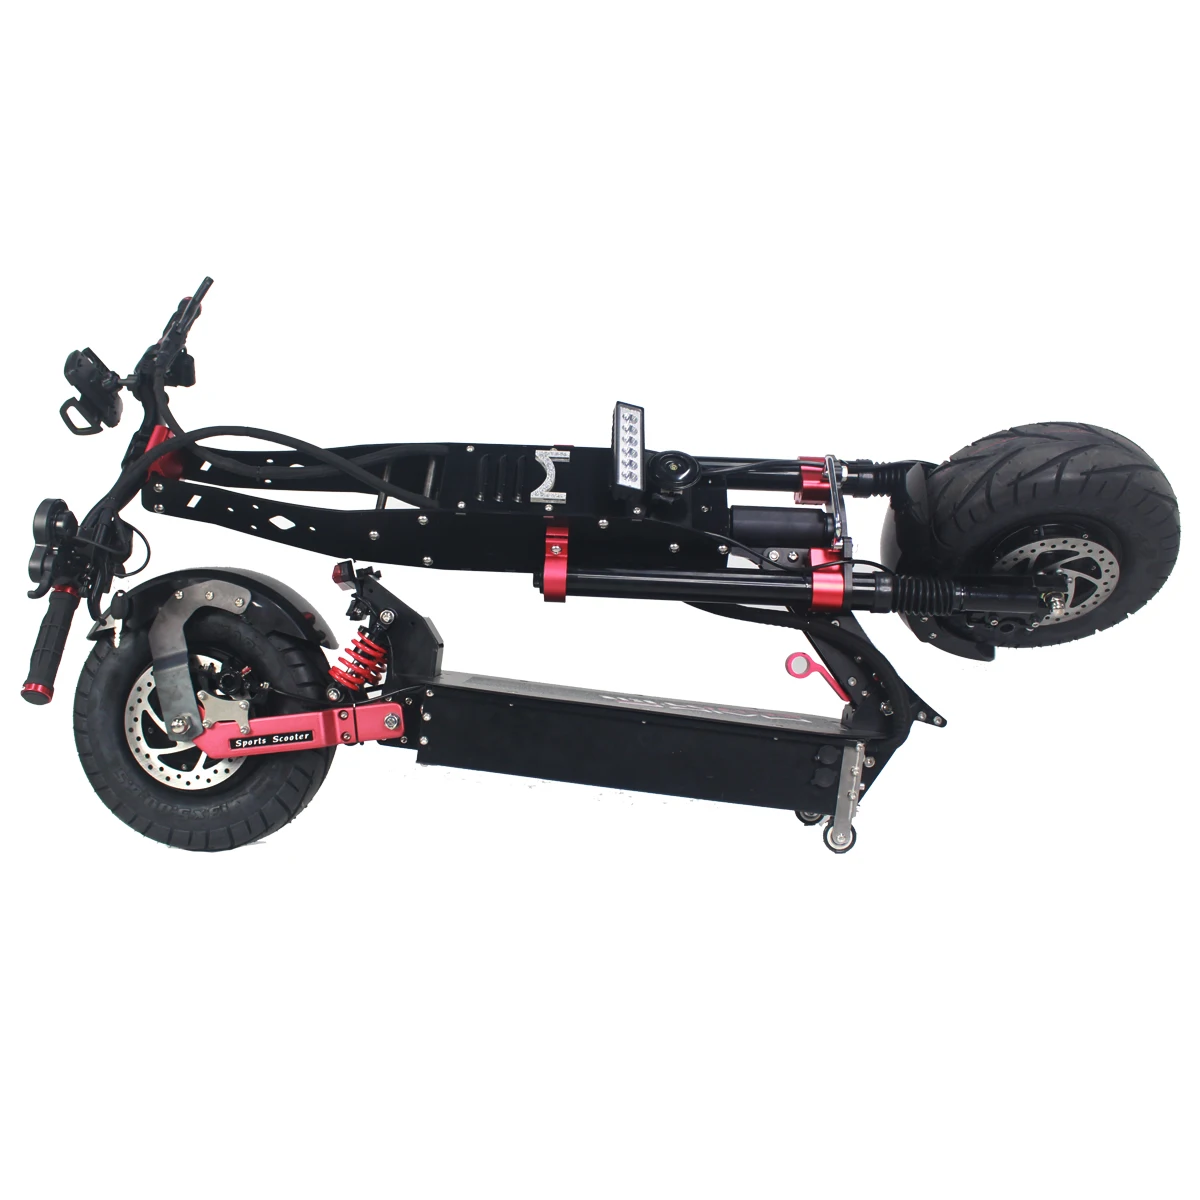 

Hight Quality Low Price Maike MK9x 7200W powerful motor high speed 13 inch fat tire electric scooter for adult, Red black